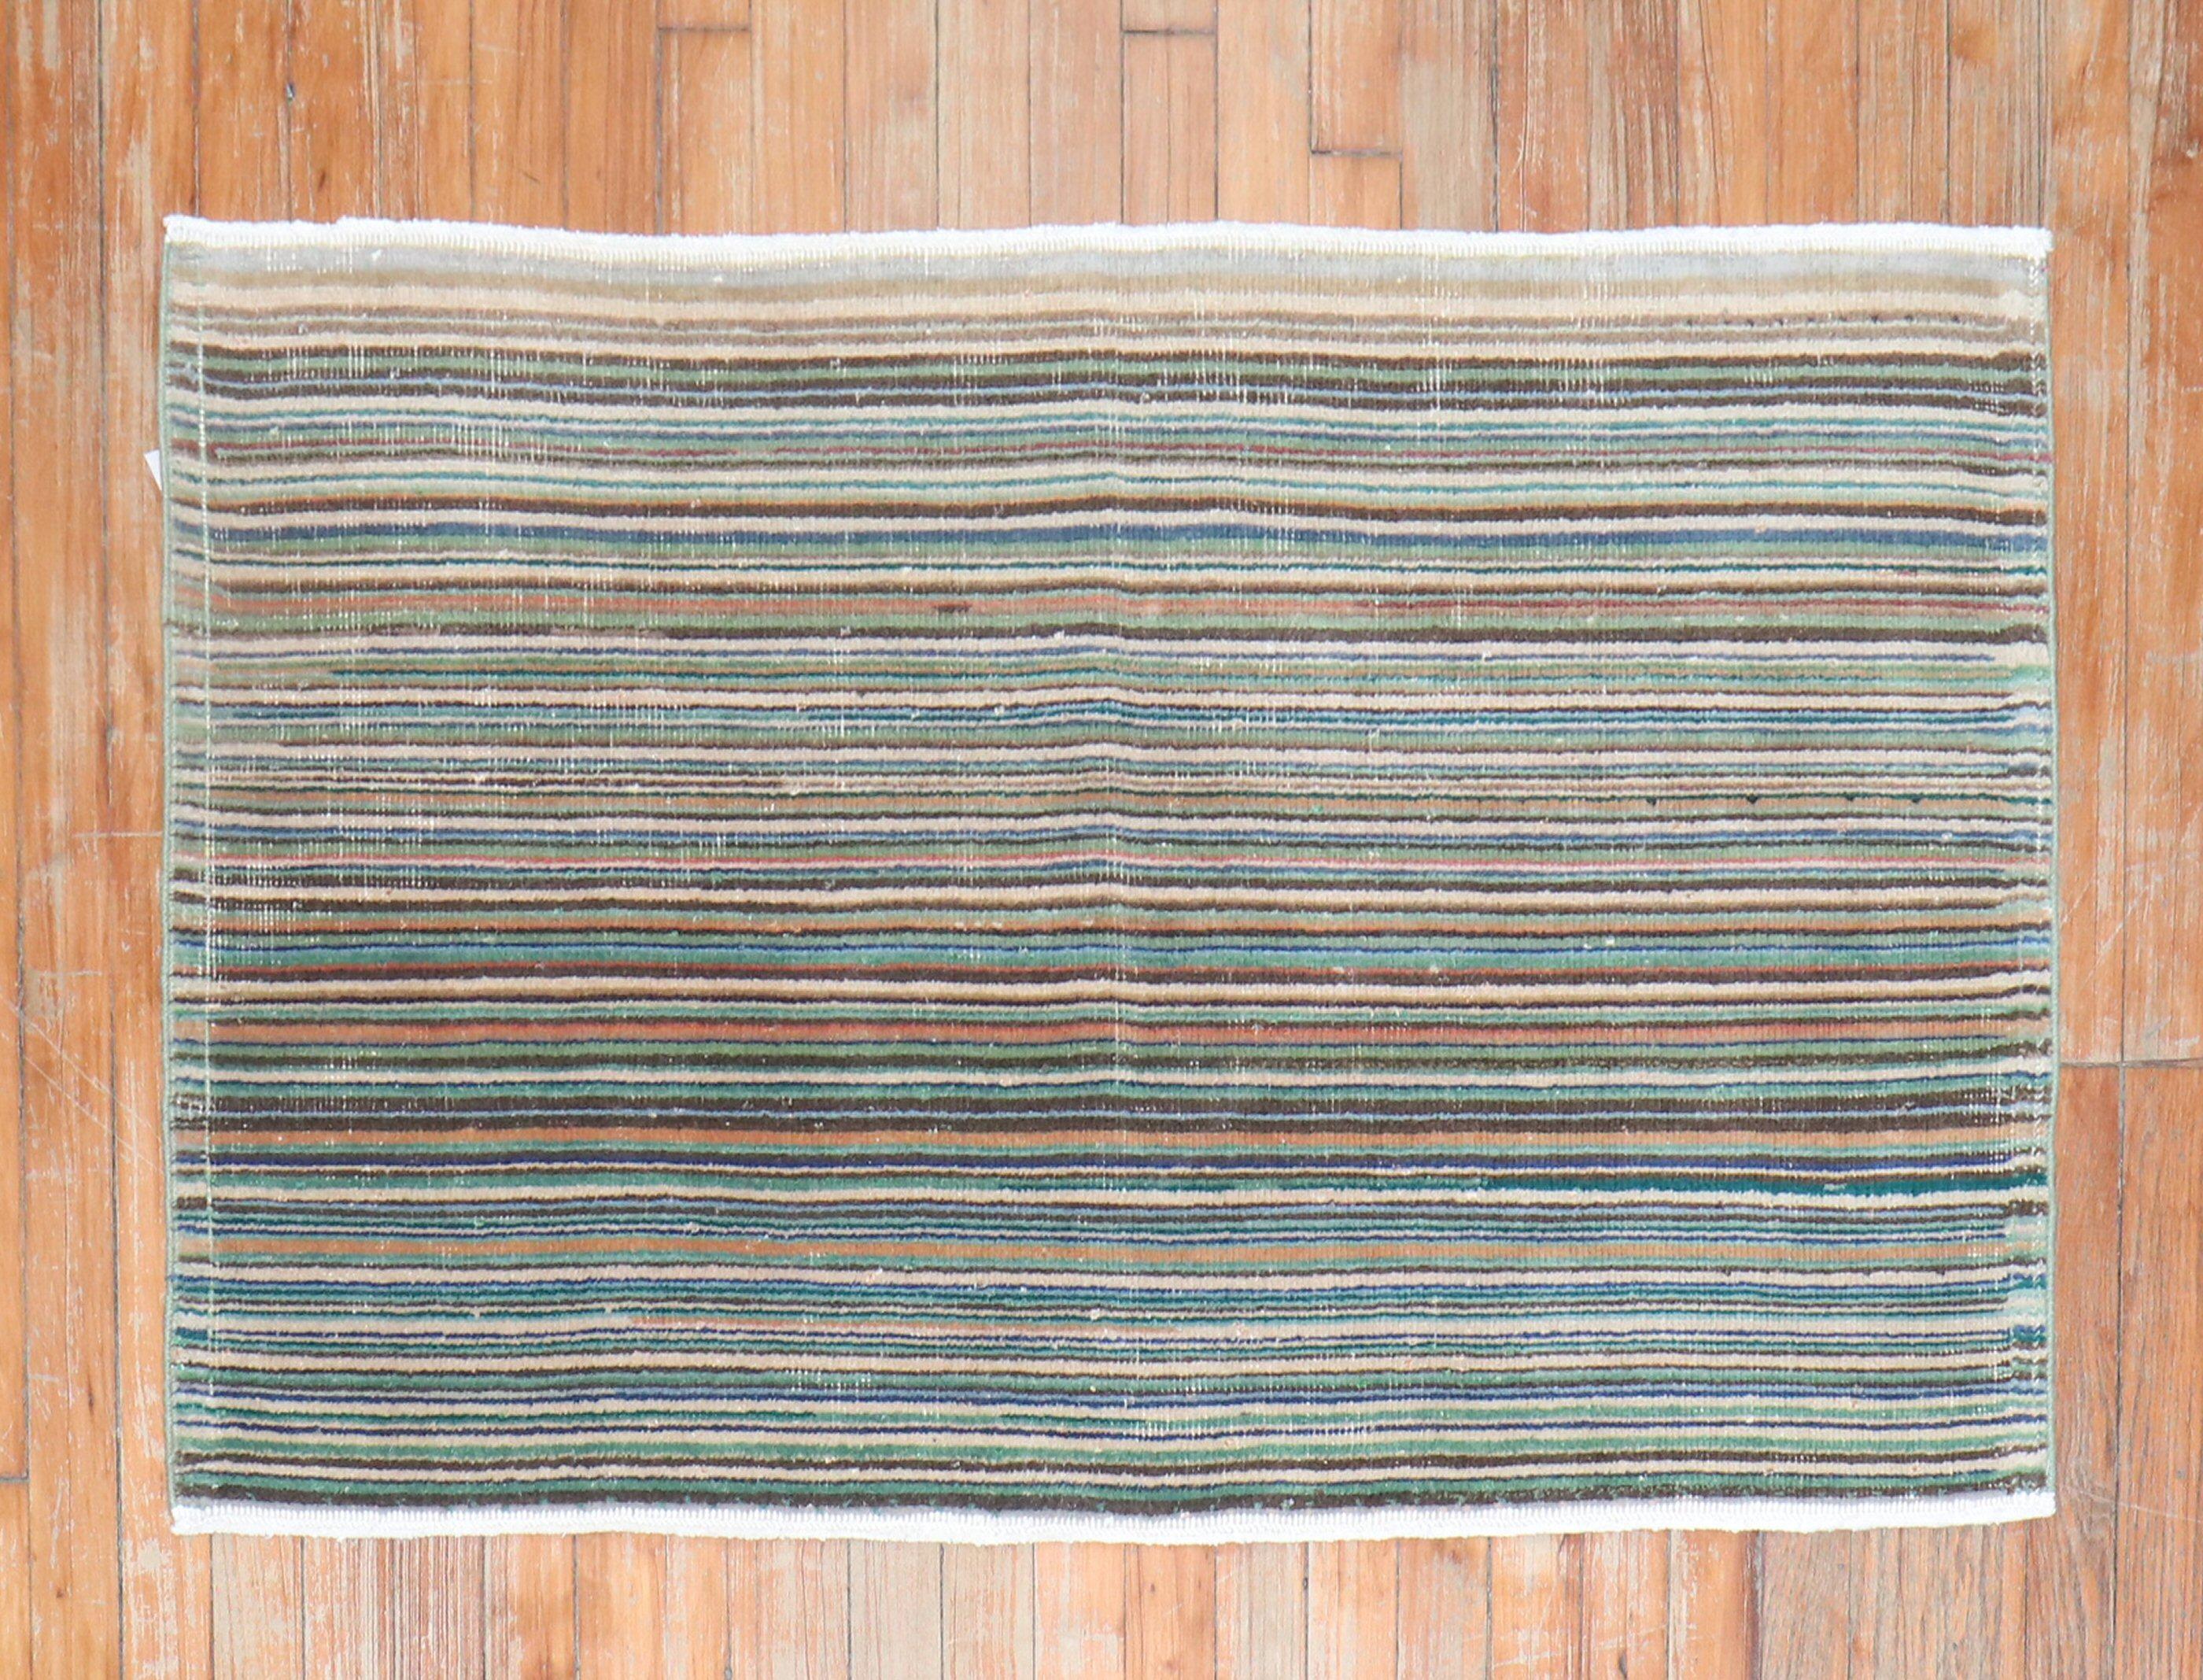 Mid-20th century Turkish Deco rug with a thin striped design.

Measures: 2'5''x 3'11''.